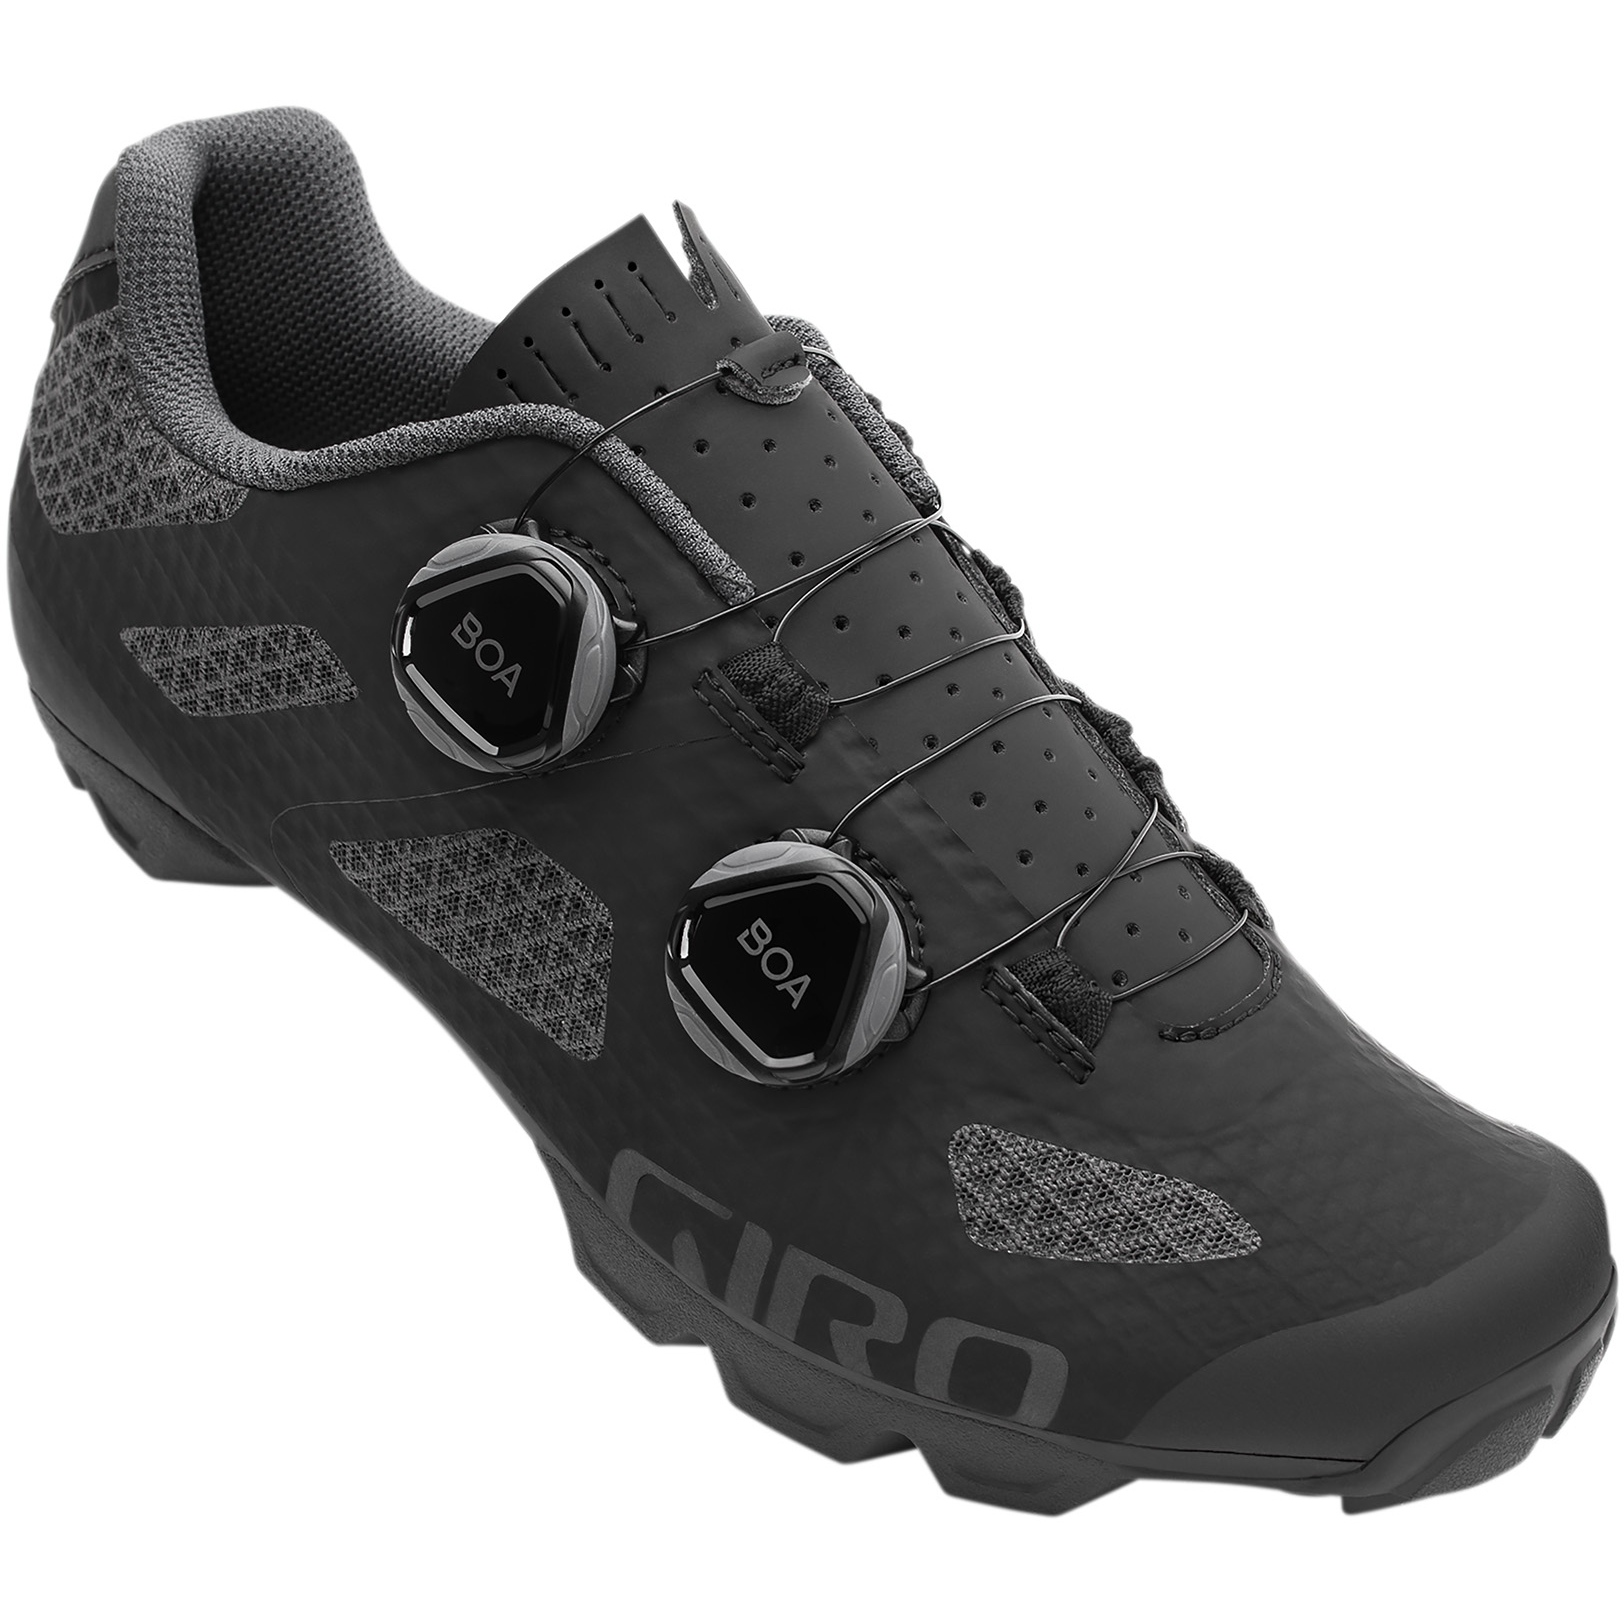 Picture of Giro Sector MTB Shoes Women - black/dark shadow